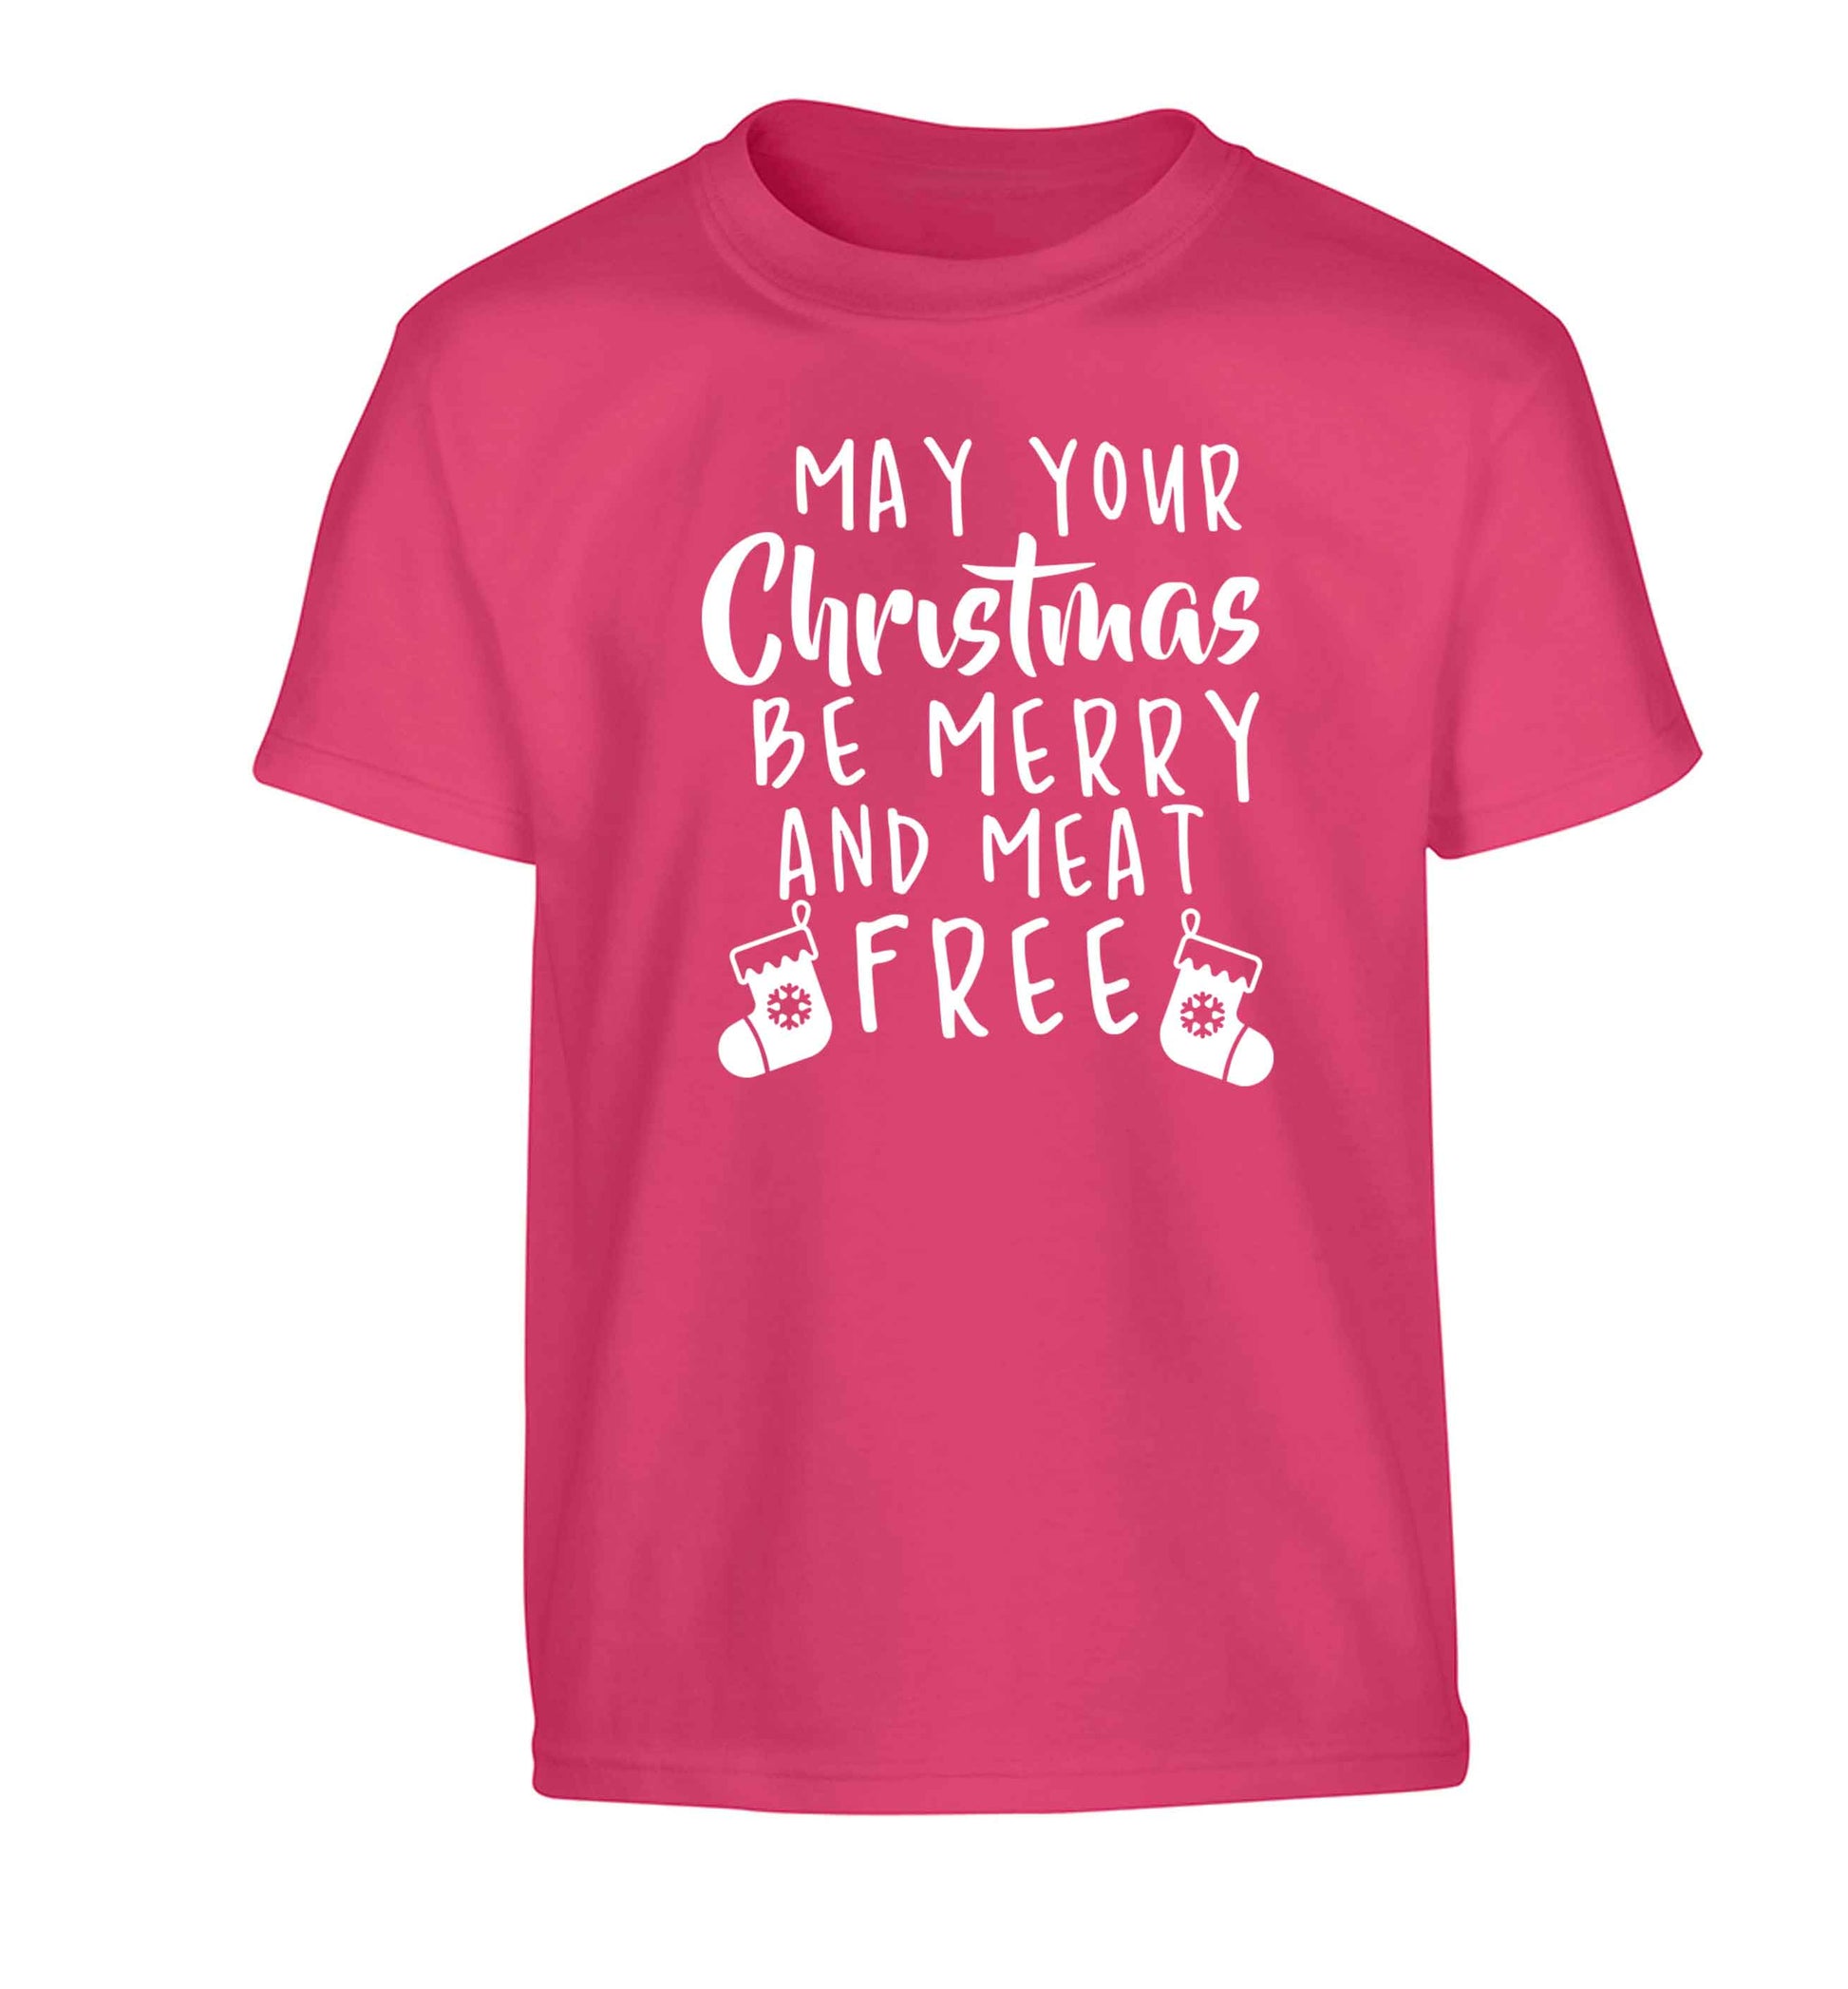 May your Christmas be merry and meat free Children's pink Tshirt 12-13 Years